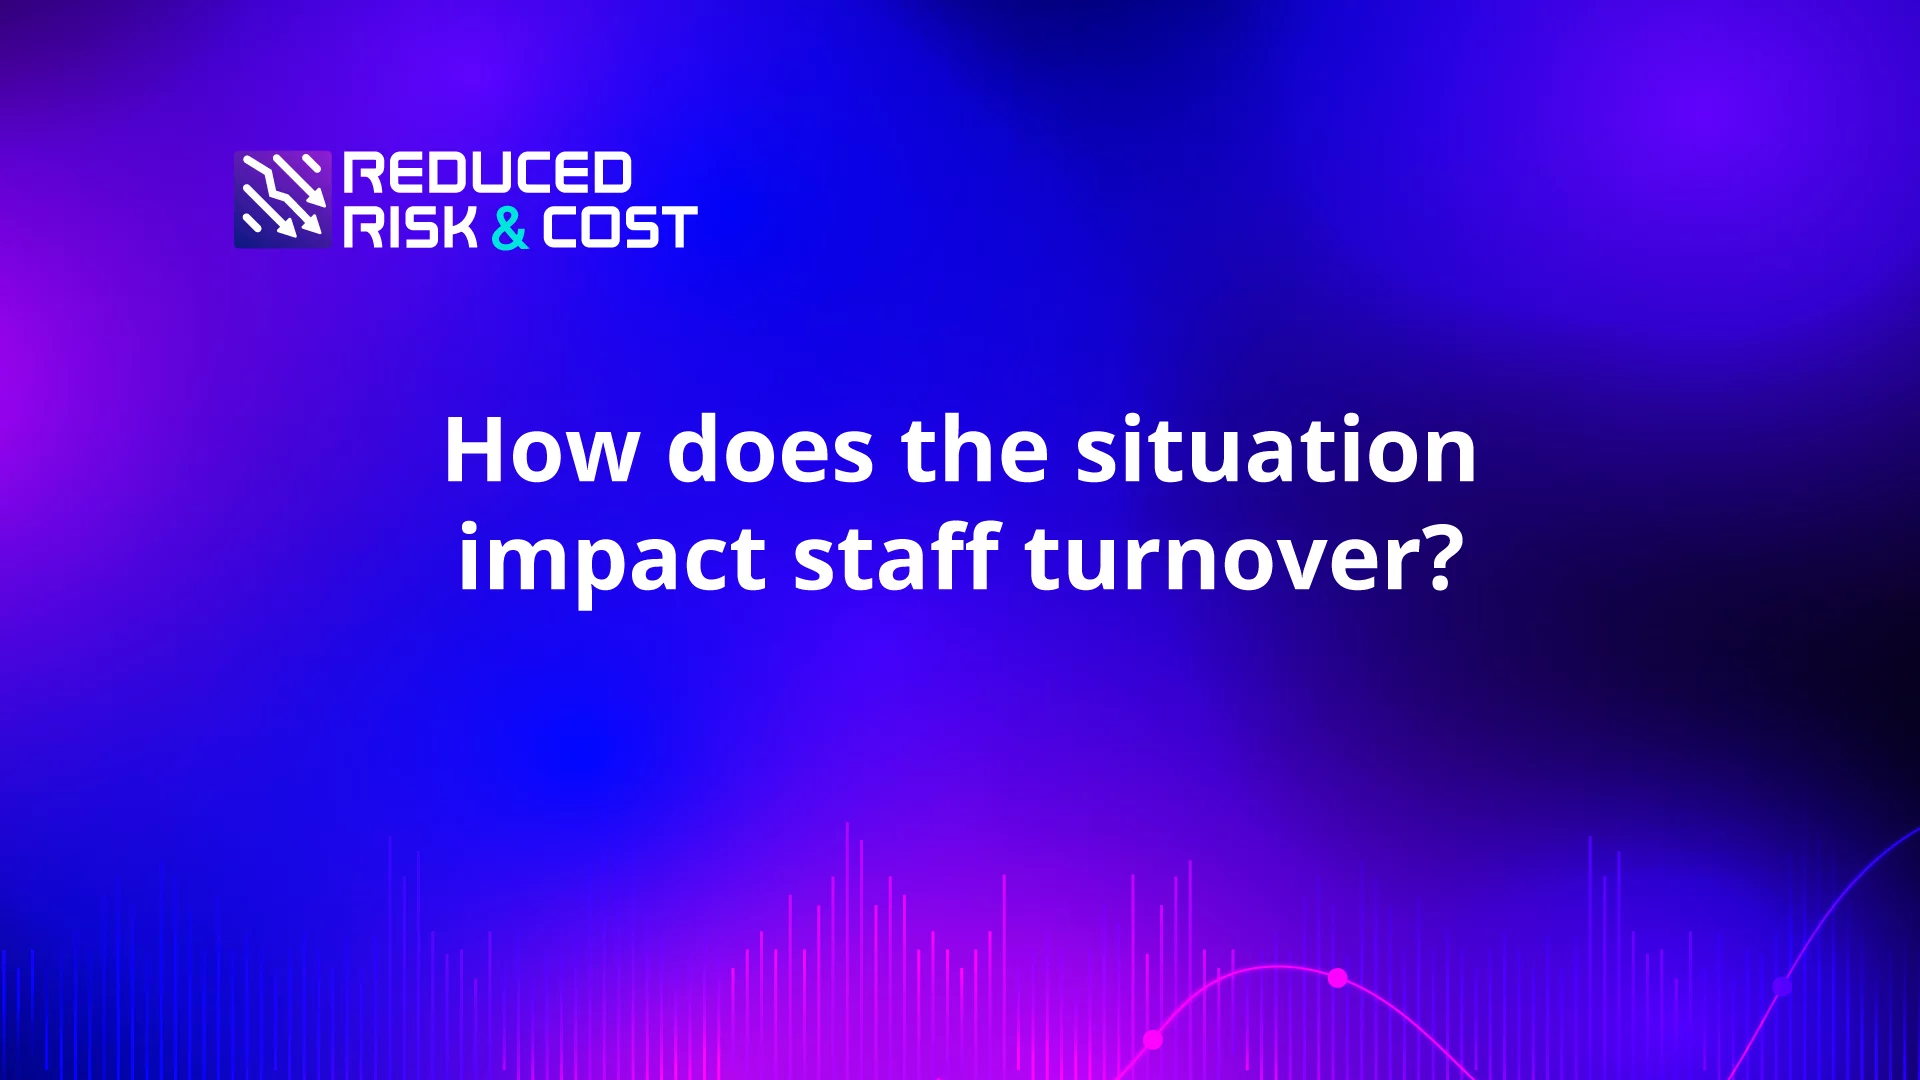 How does the situation impact staff turnover?